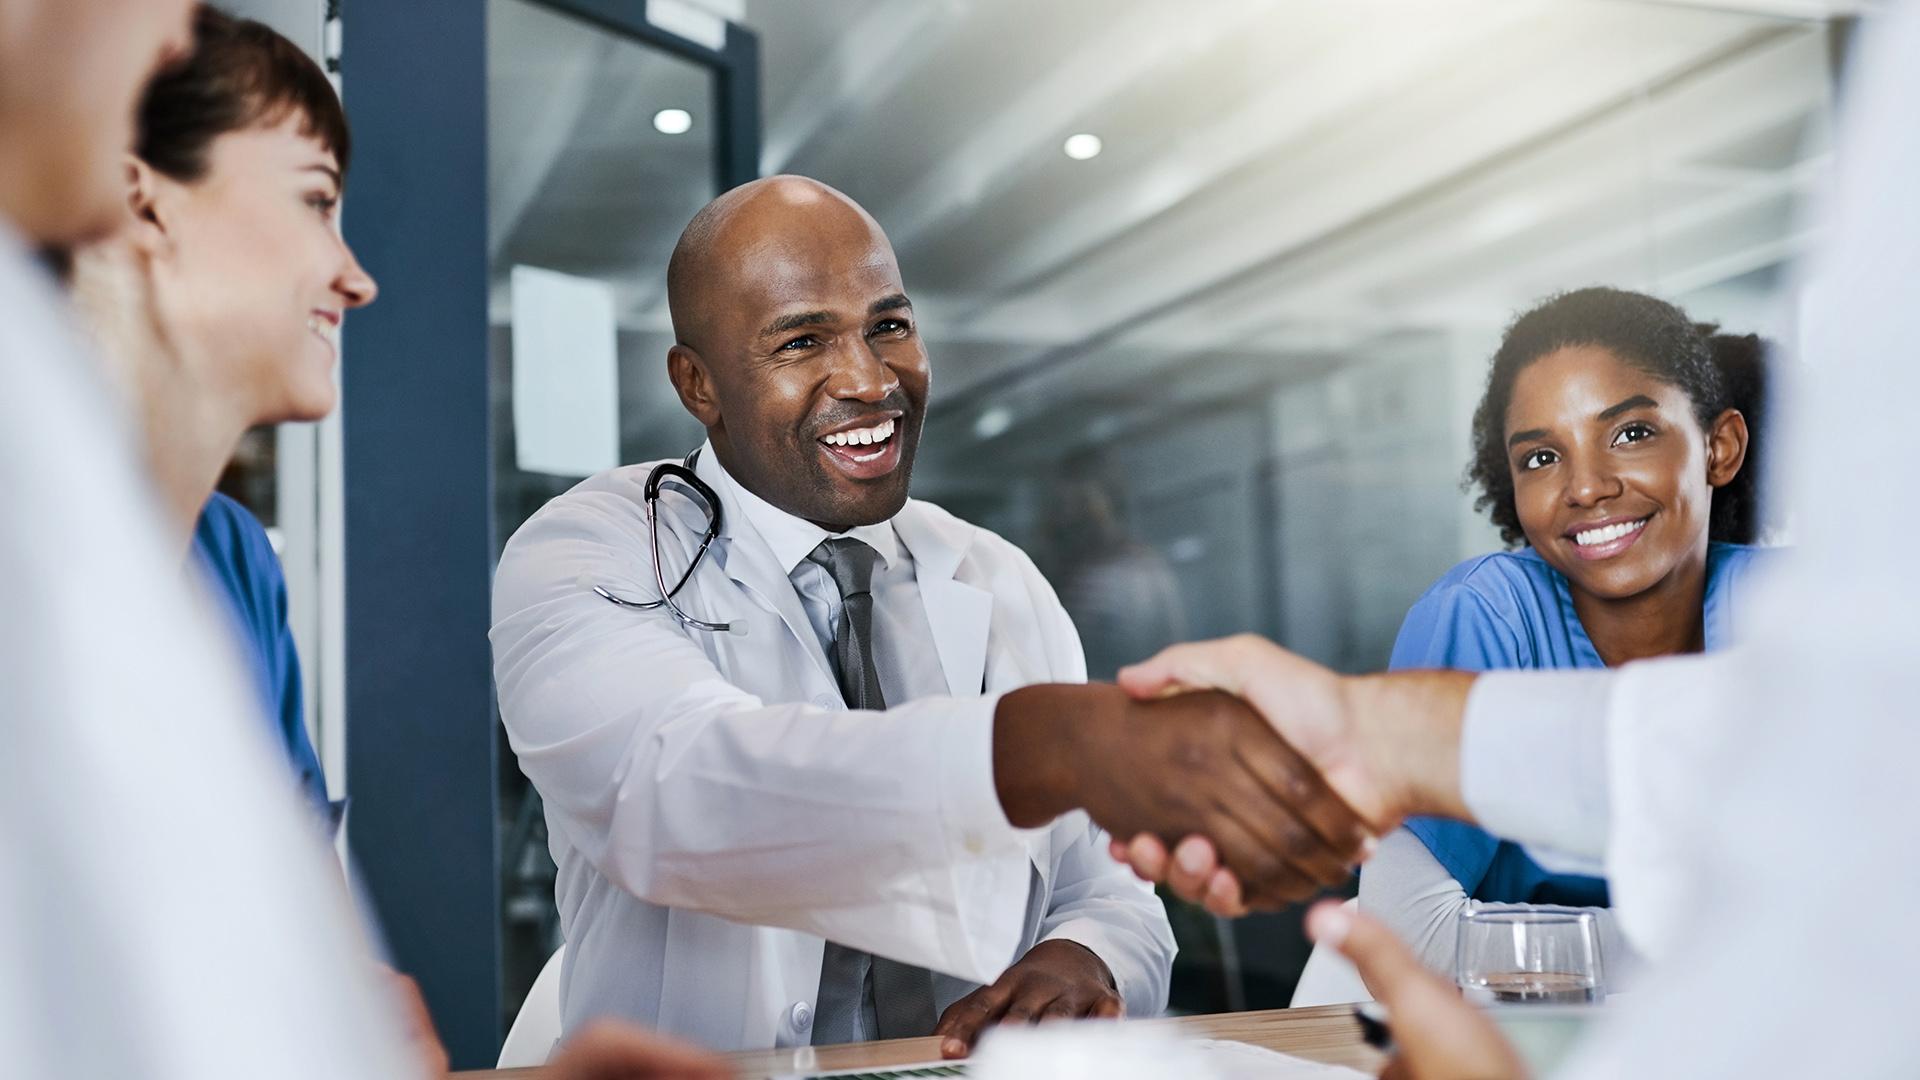 A doctor smiling and shaking hands with a colleague.